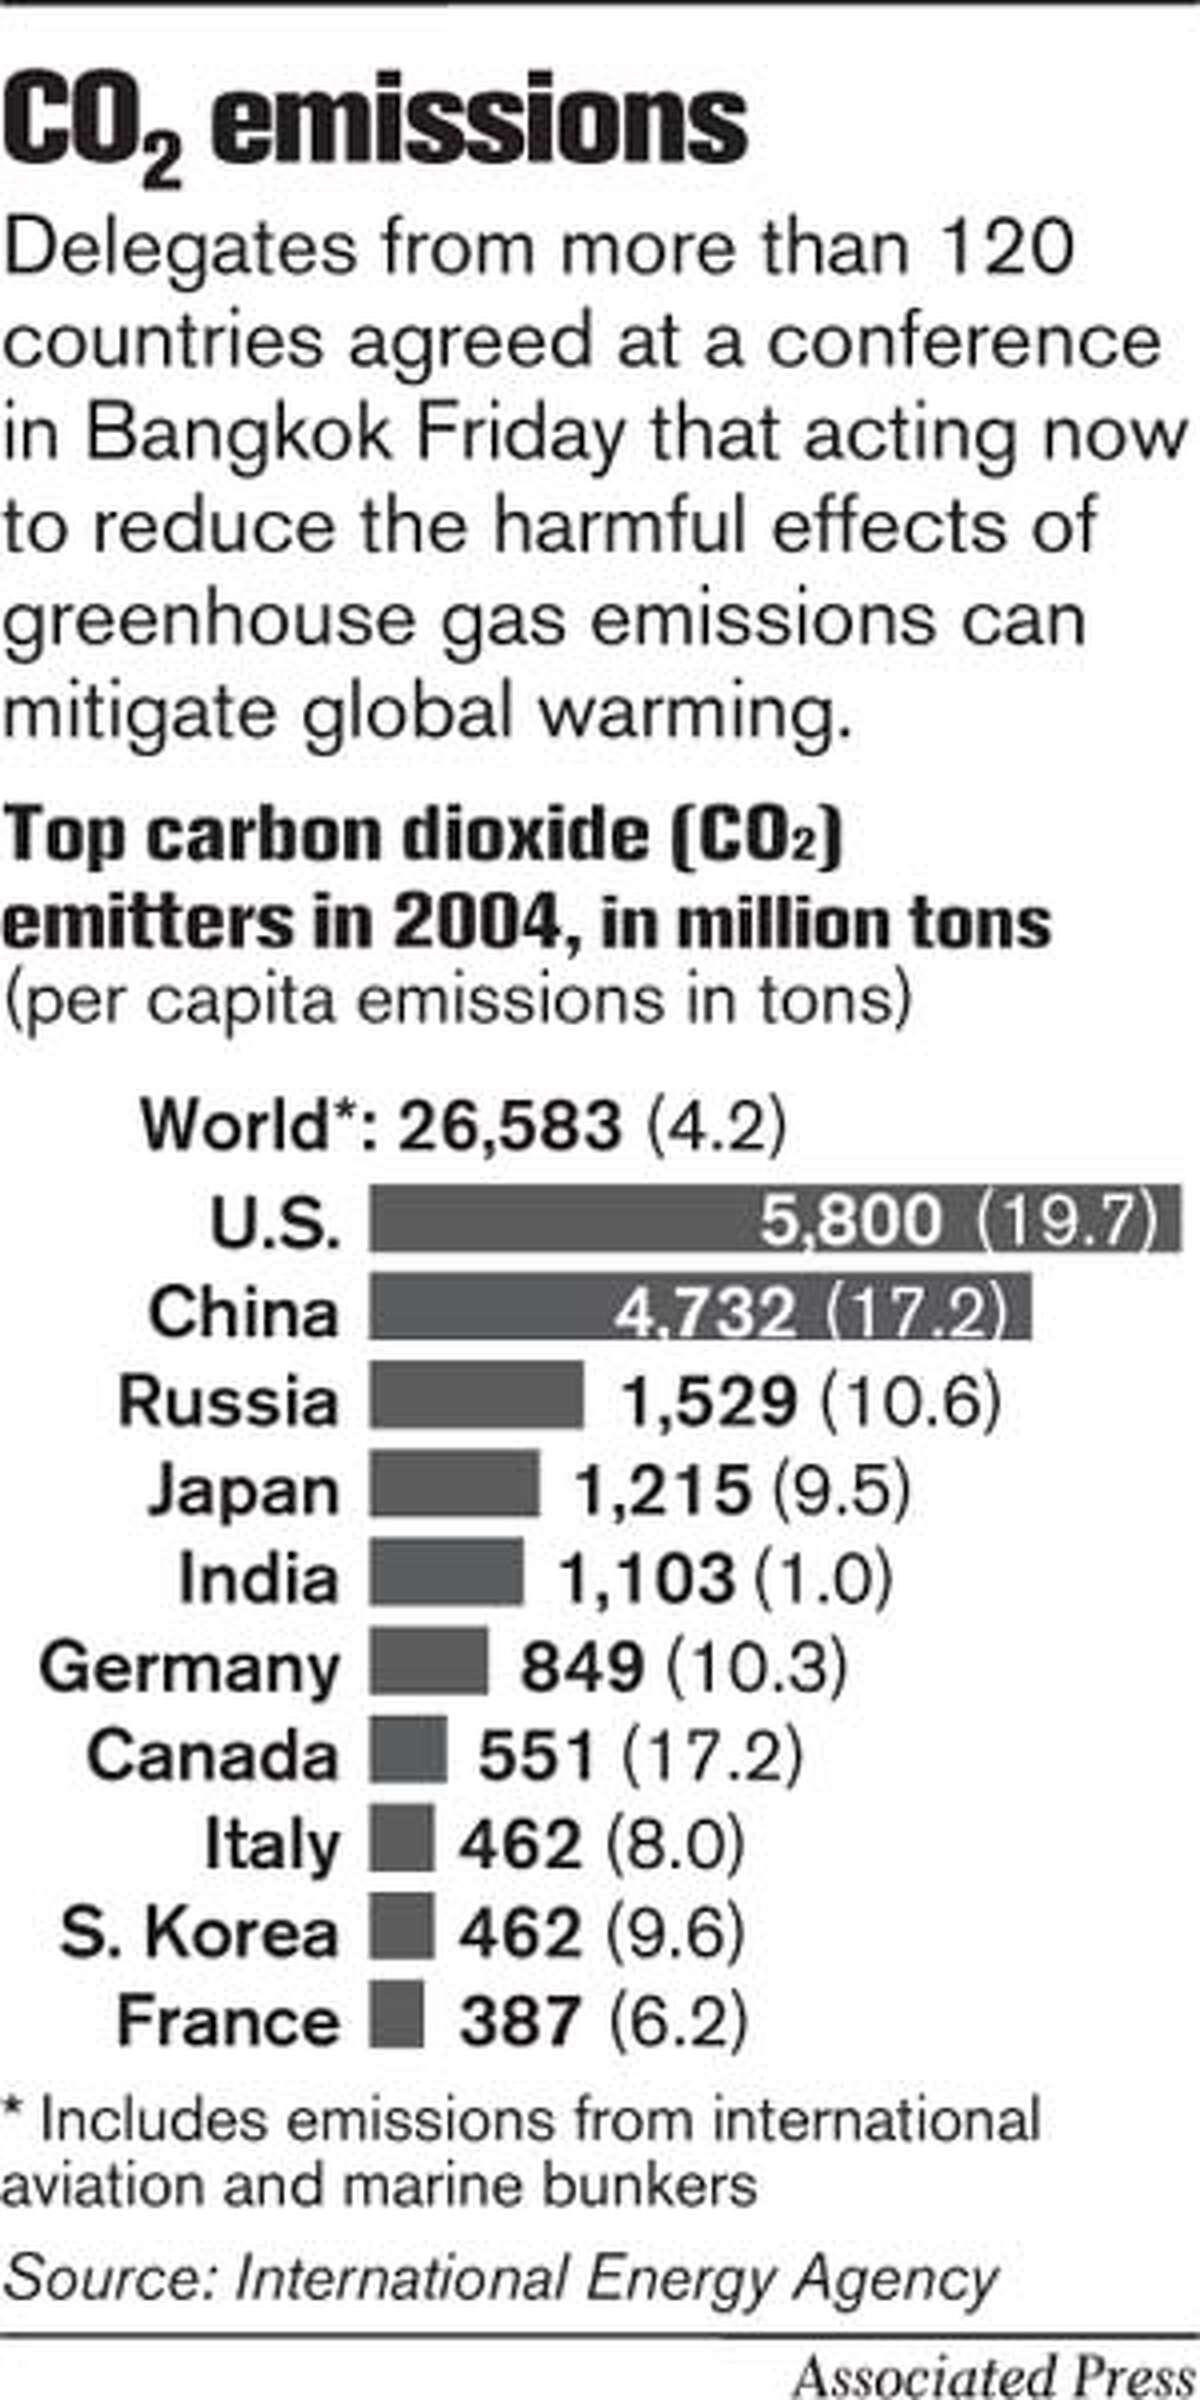 CO2 Emissions. Associated Press Graphic